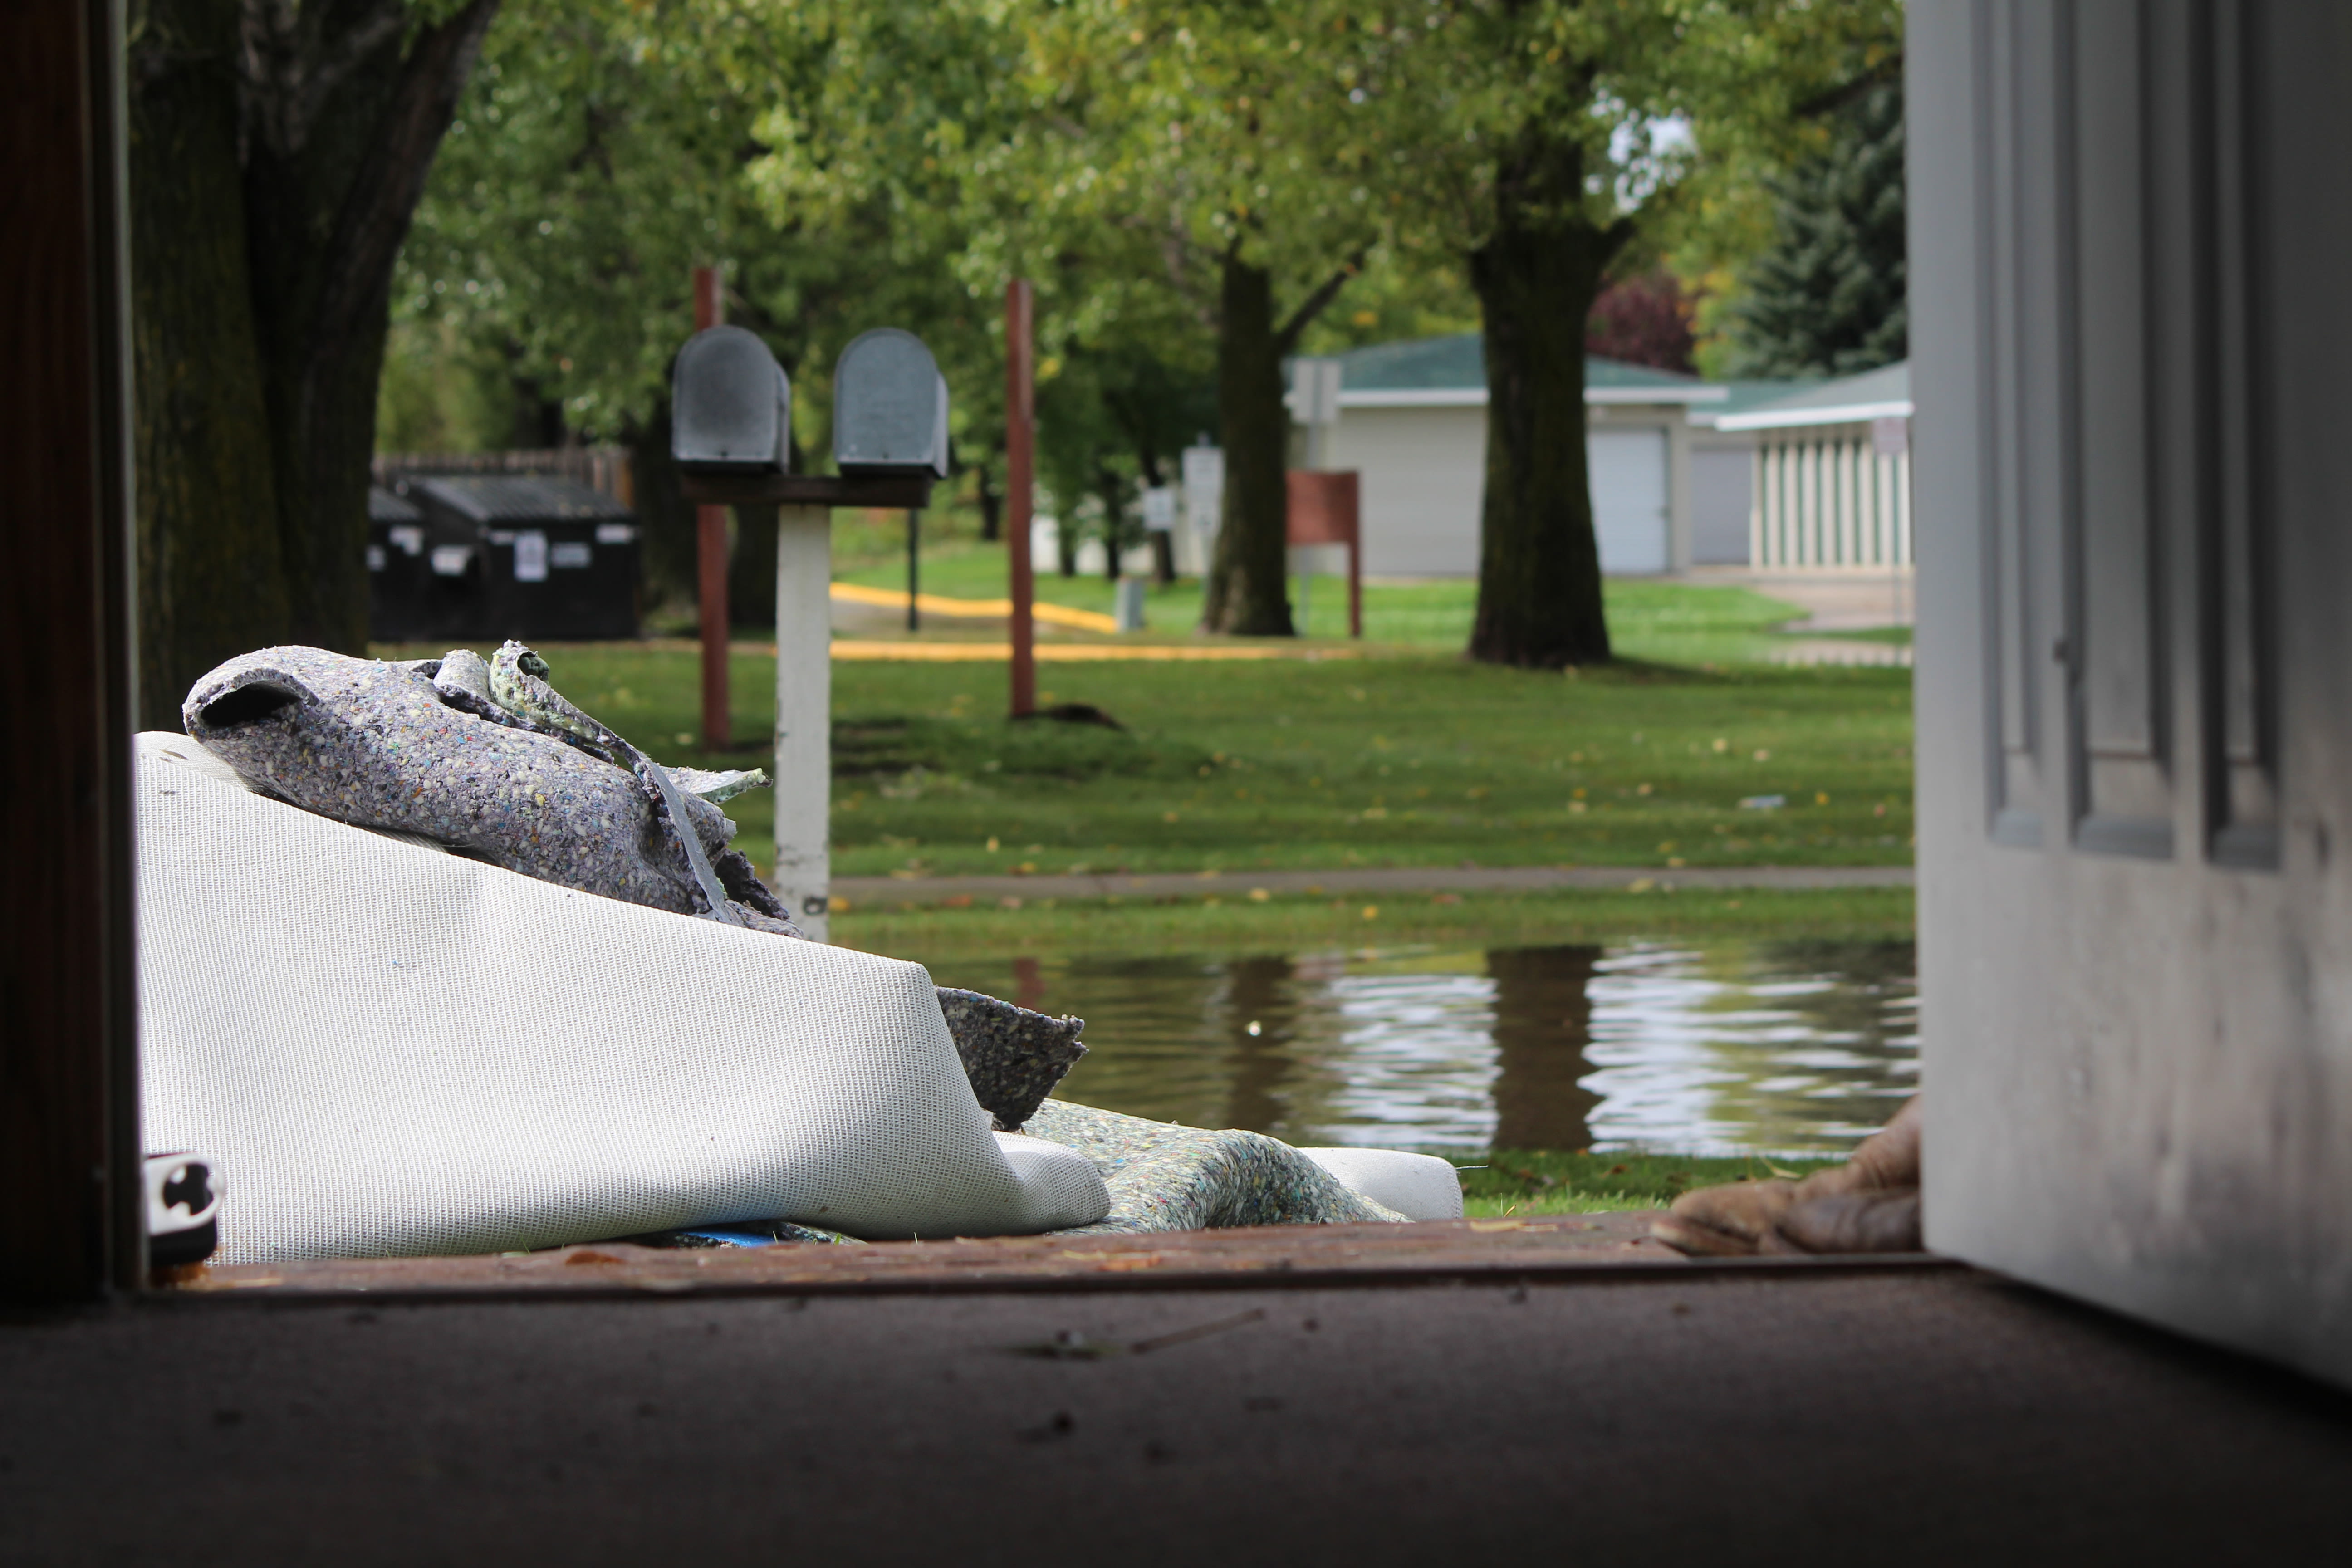 Increasing capacity for stormwater key for the future of Grand Forks' south end drainway